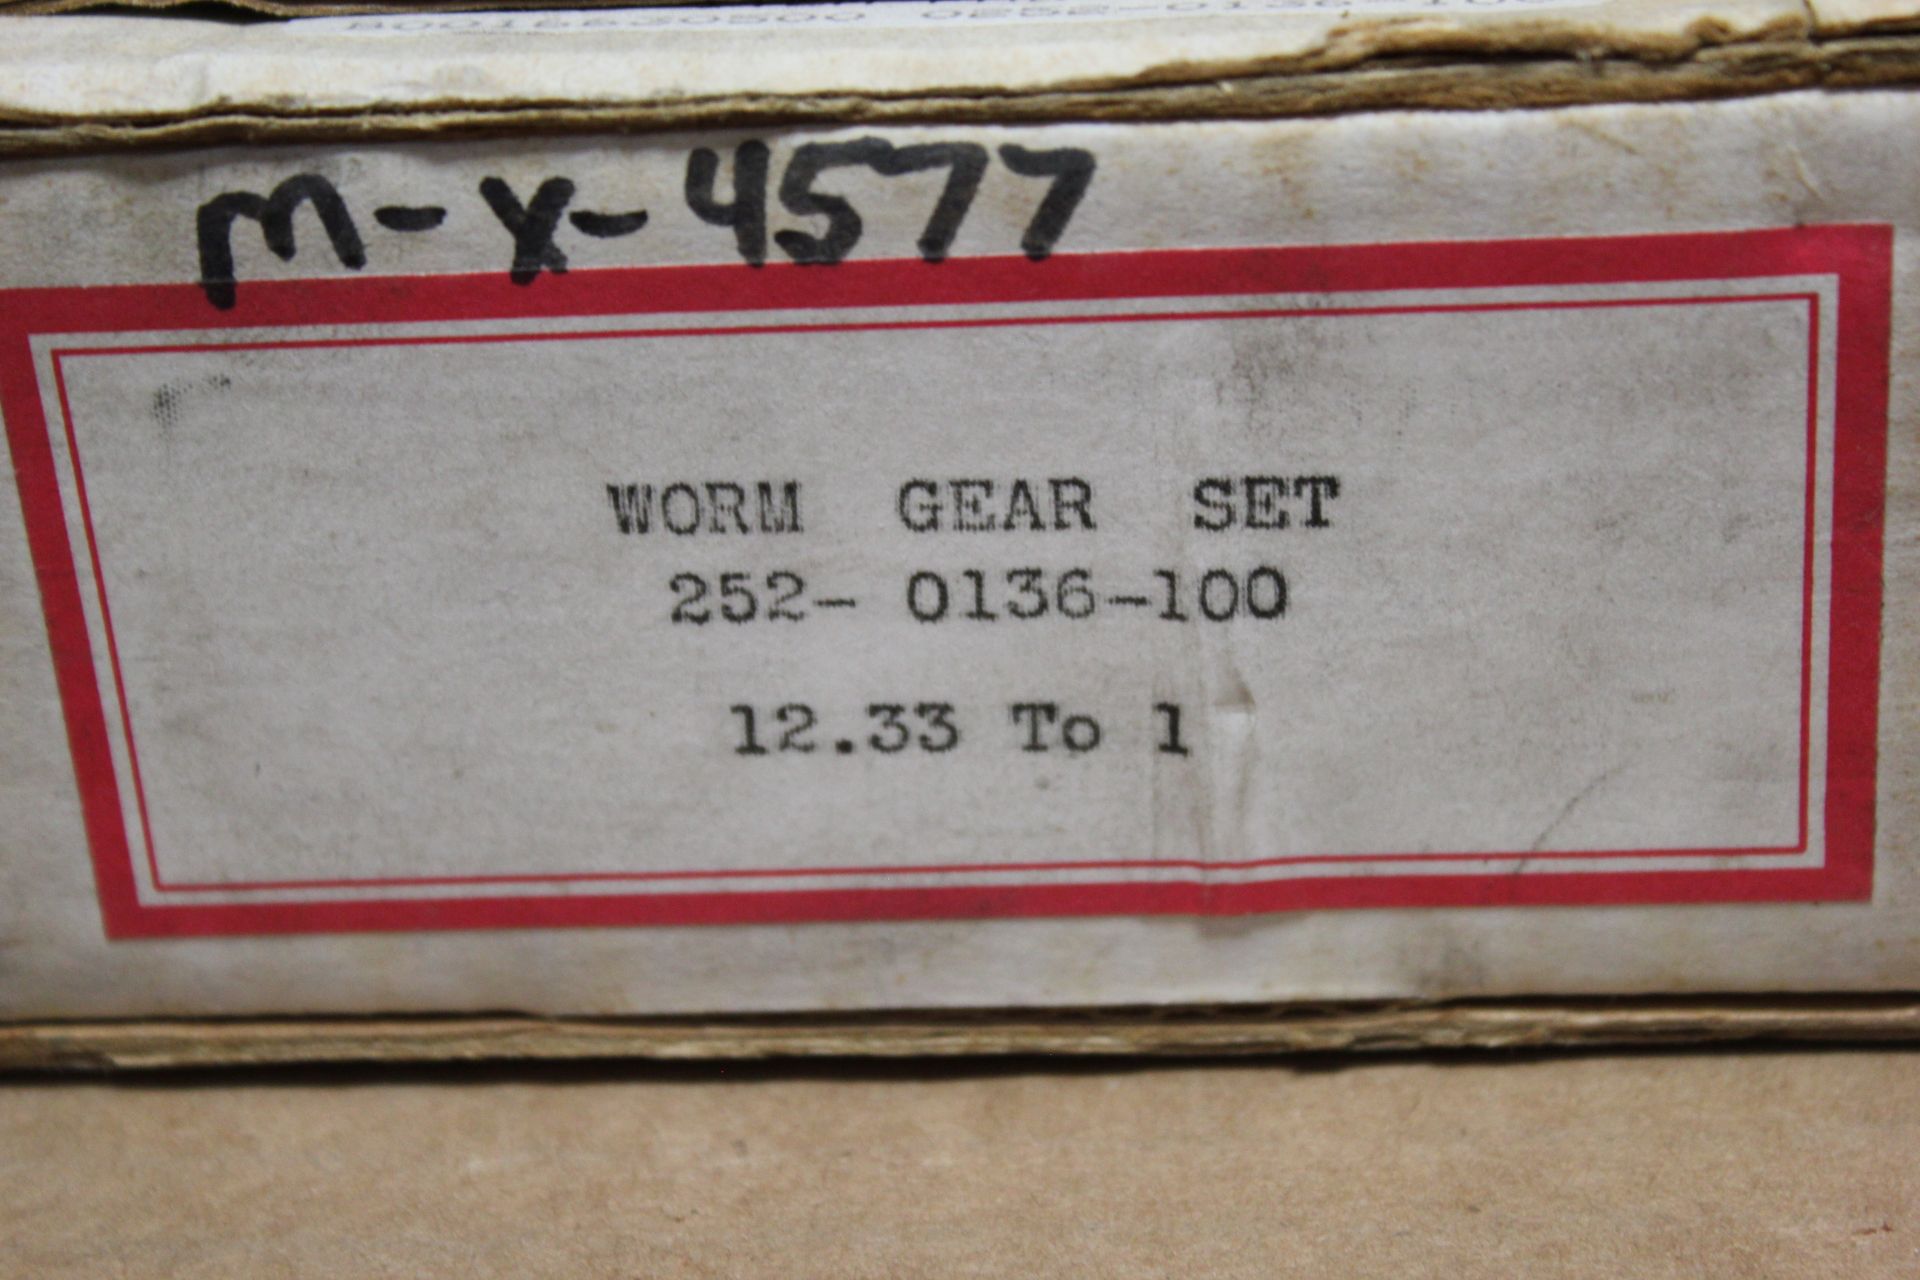 LOT OF 2 NEW MILTON ROY WORM GEAR SET - Image 2 of 5